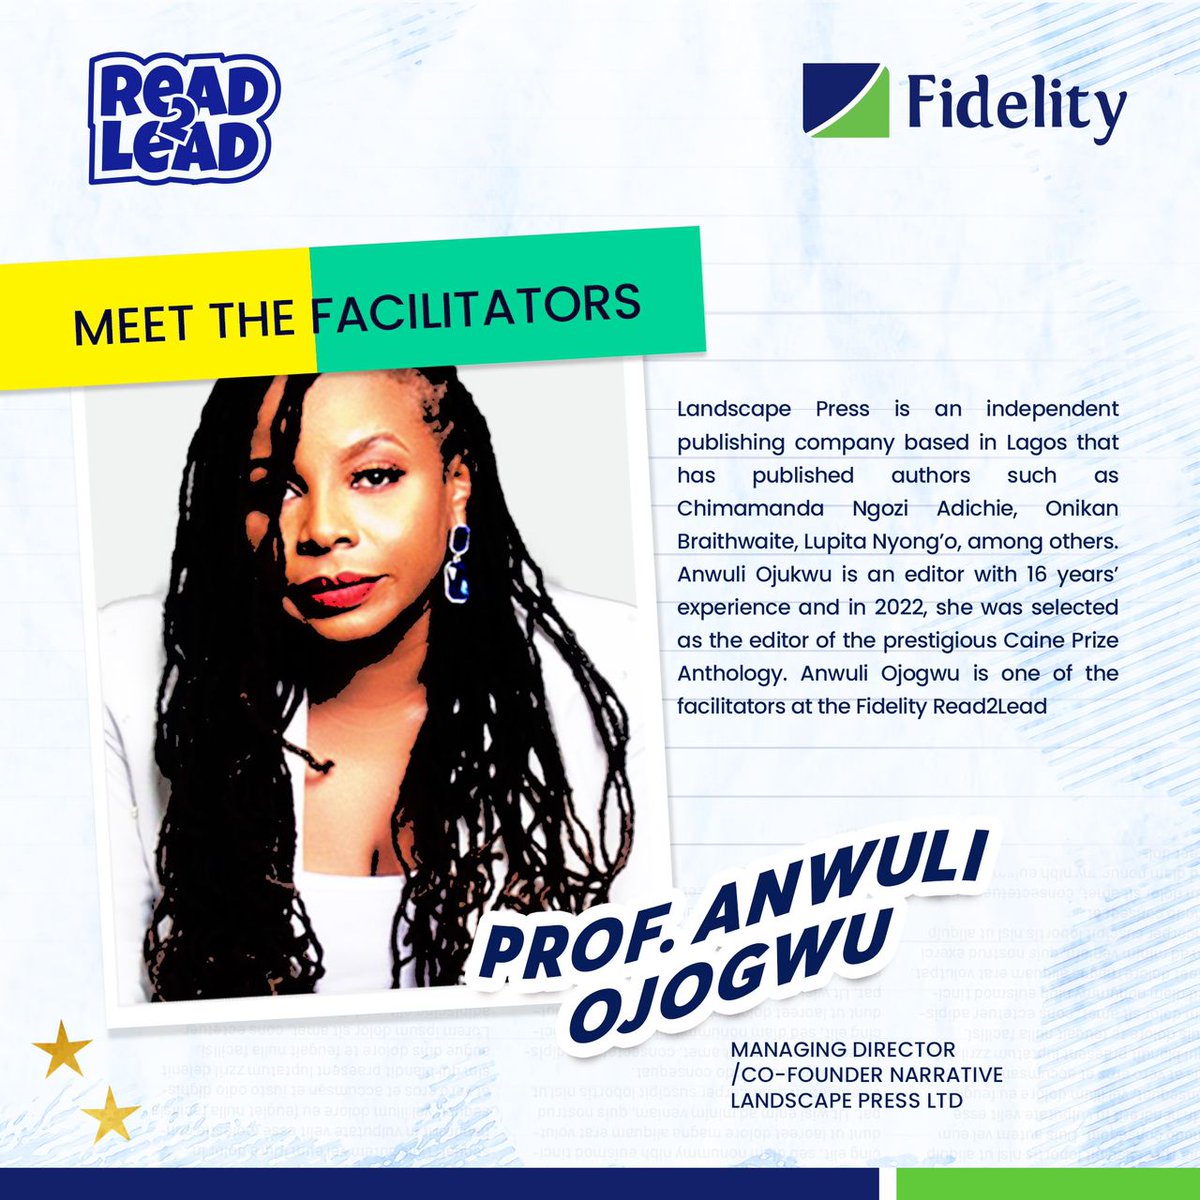 Prof. Ojogwu 📖🙌🏼
Another big name who is a facilitator of the Read2Lead by fidelity
#FidelityRead2Lead